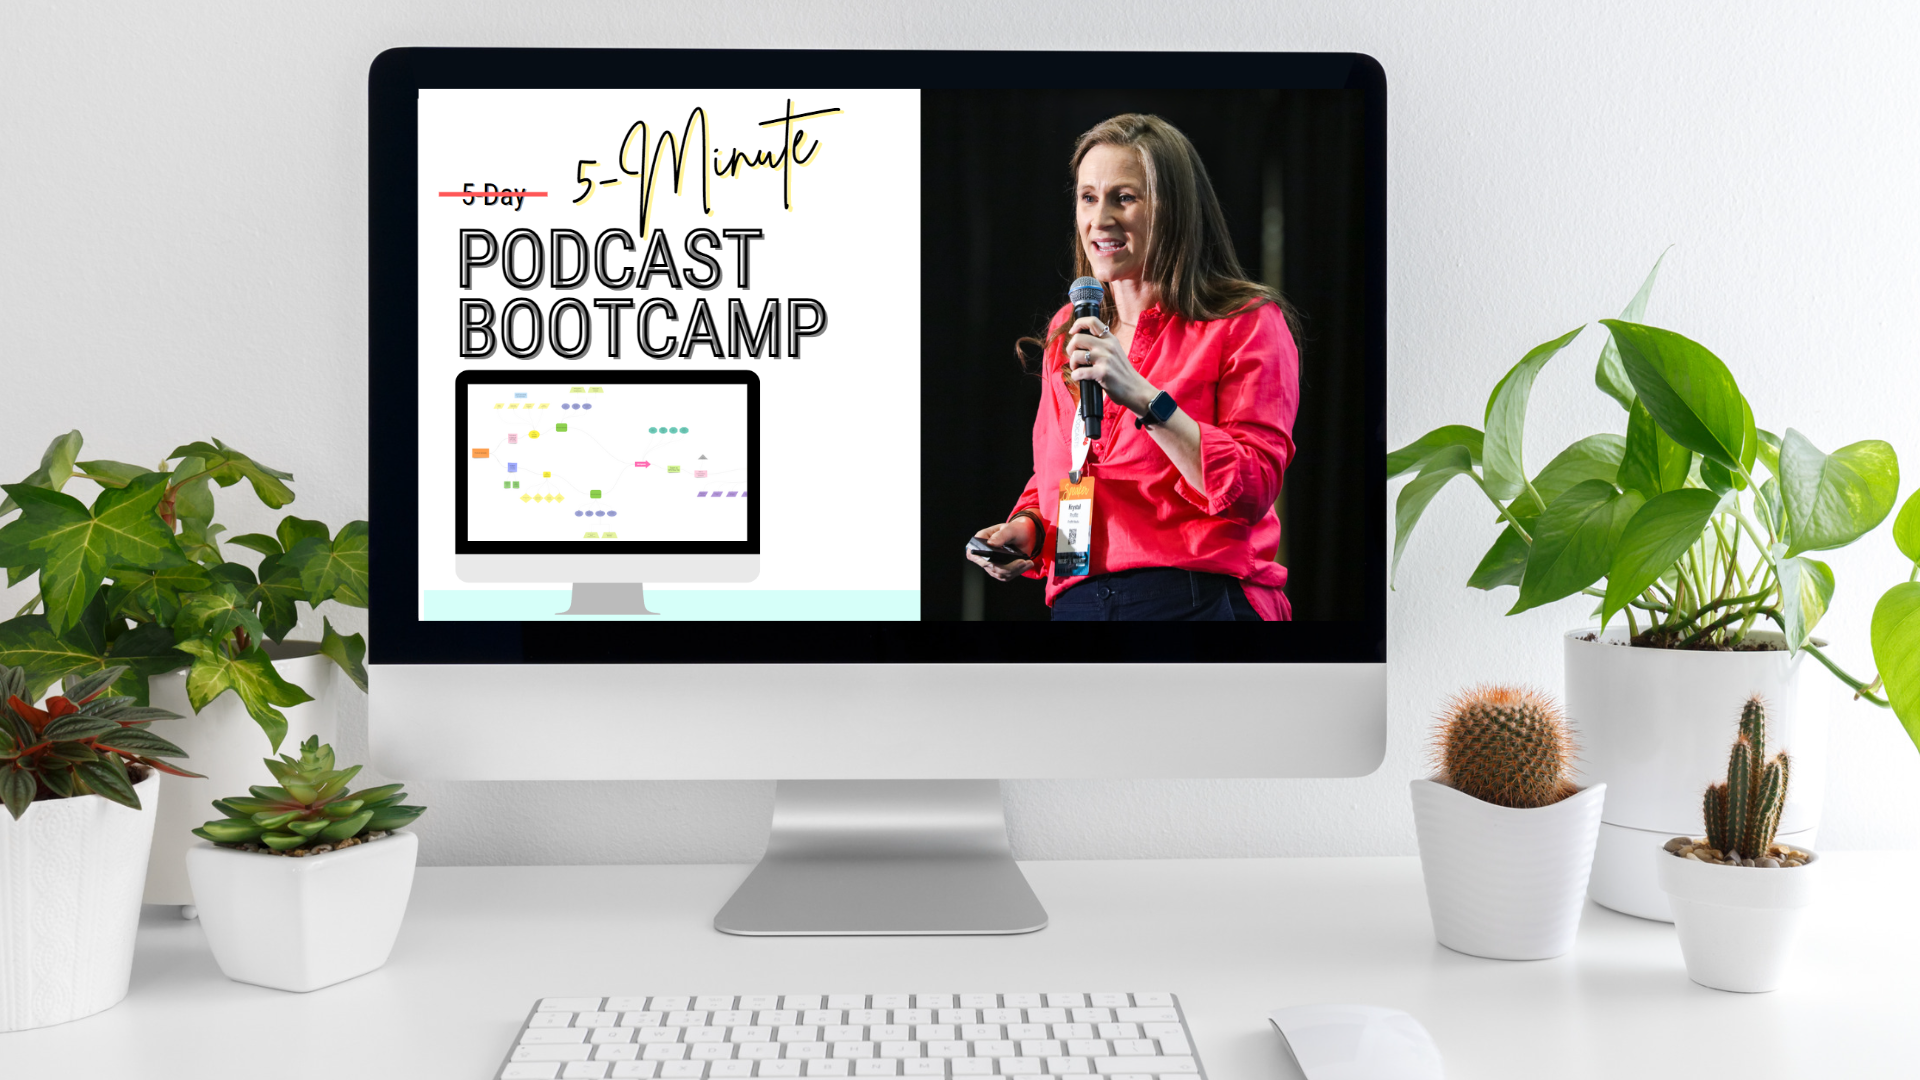 Crafting Your Creative Voice to Captivate and Connect